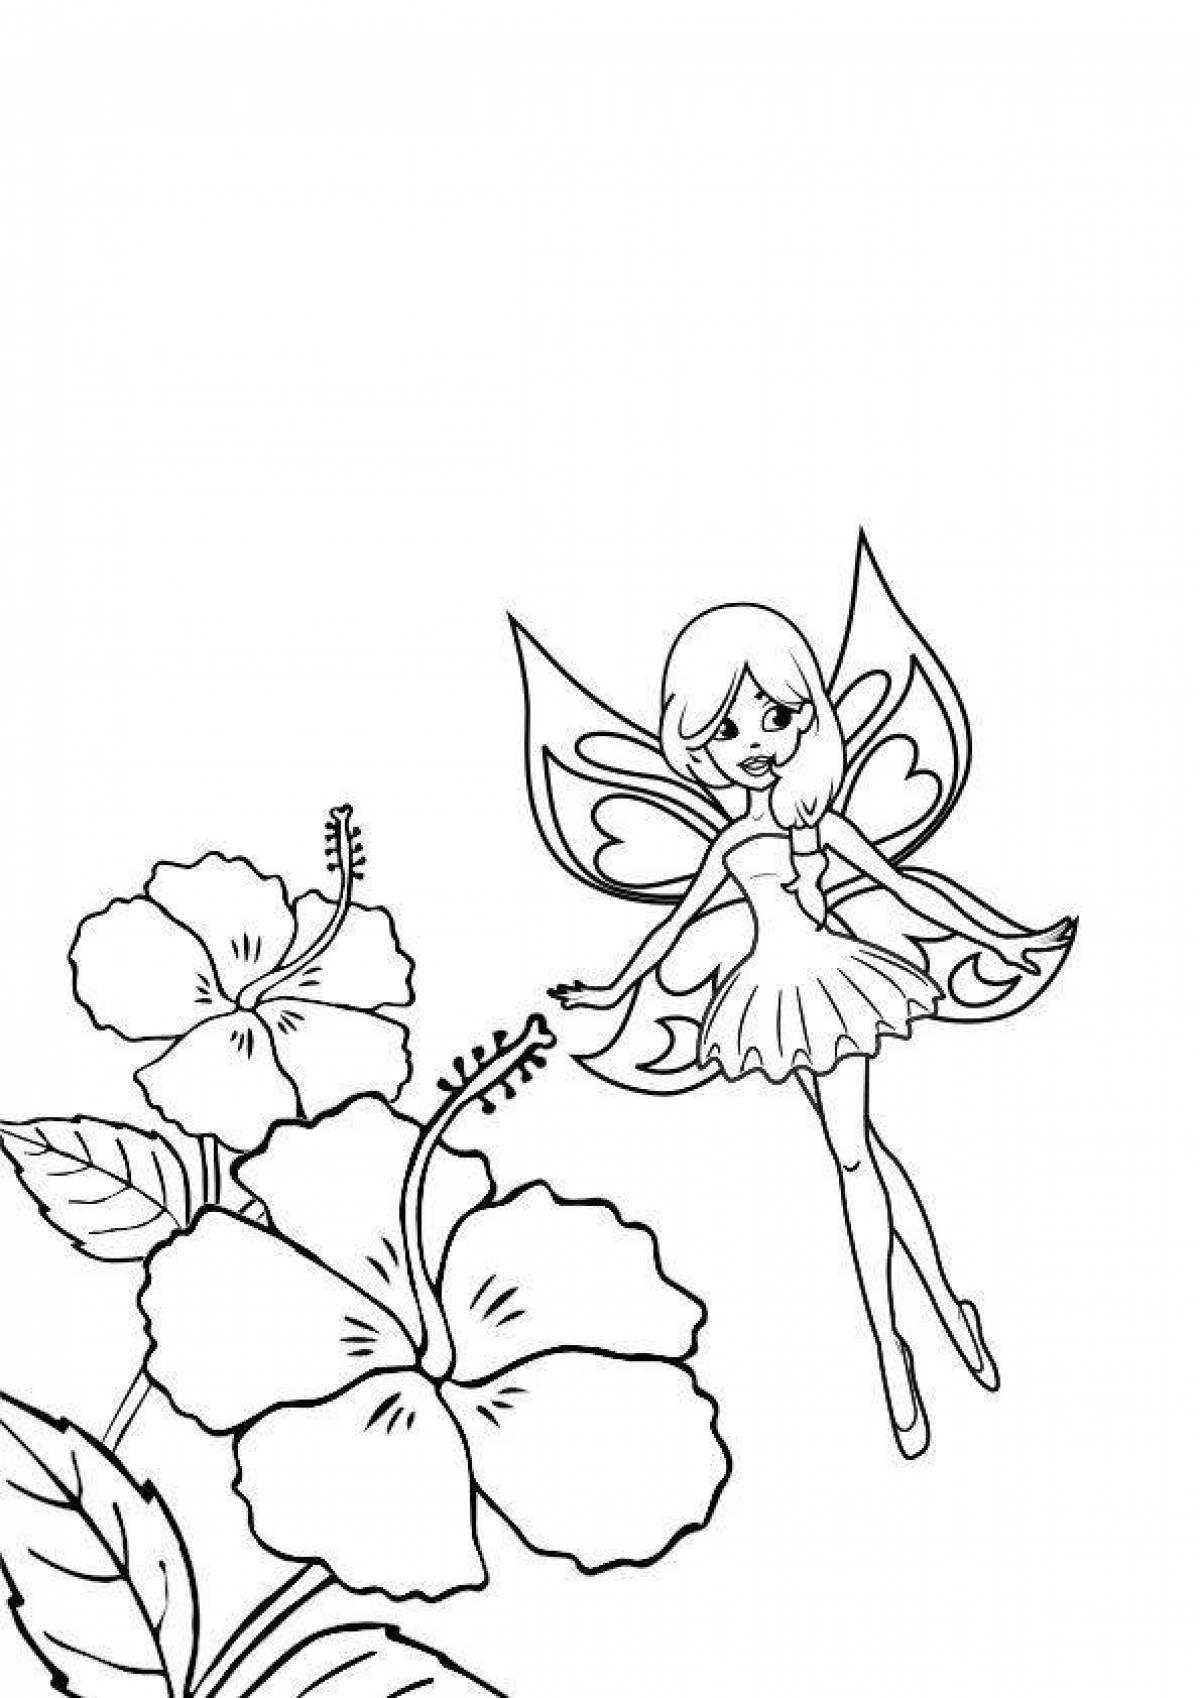 Coloring page wild little fairy